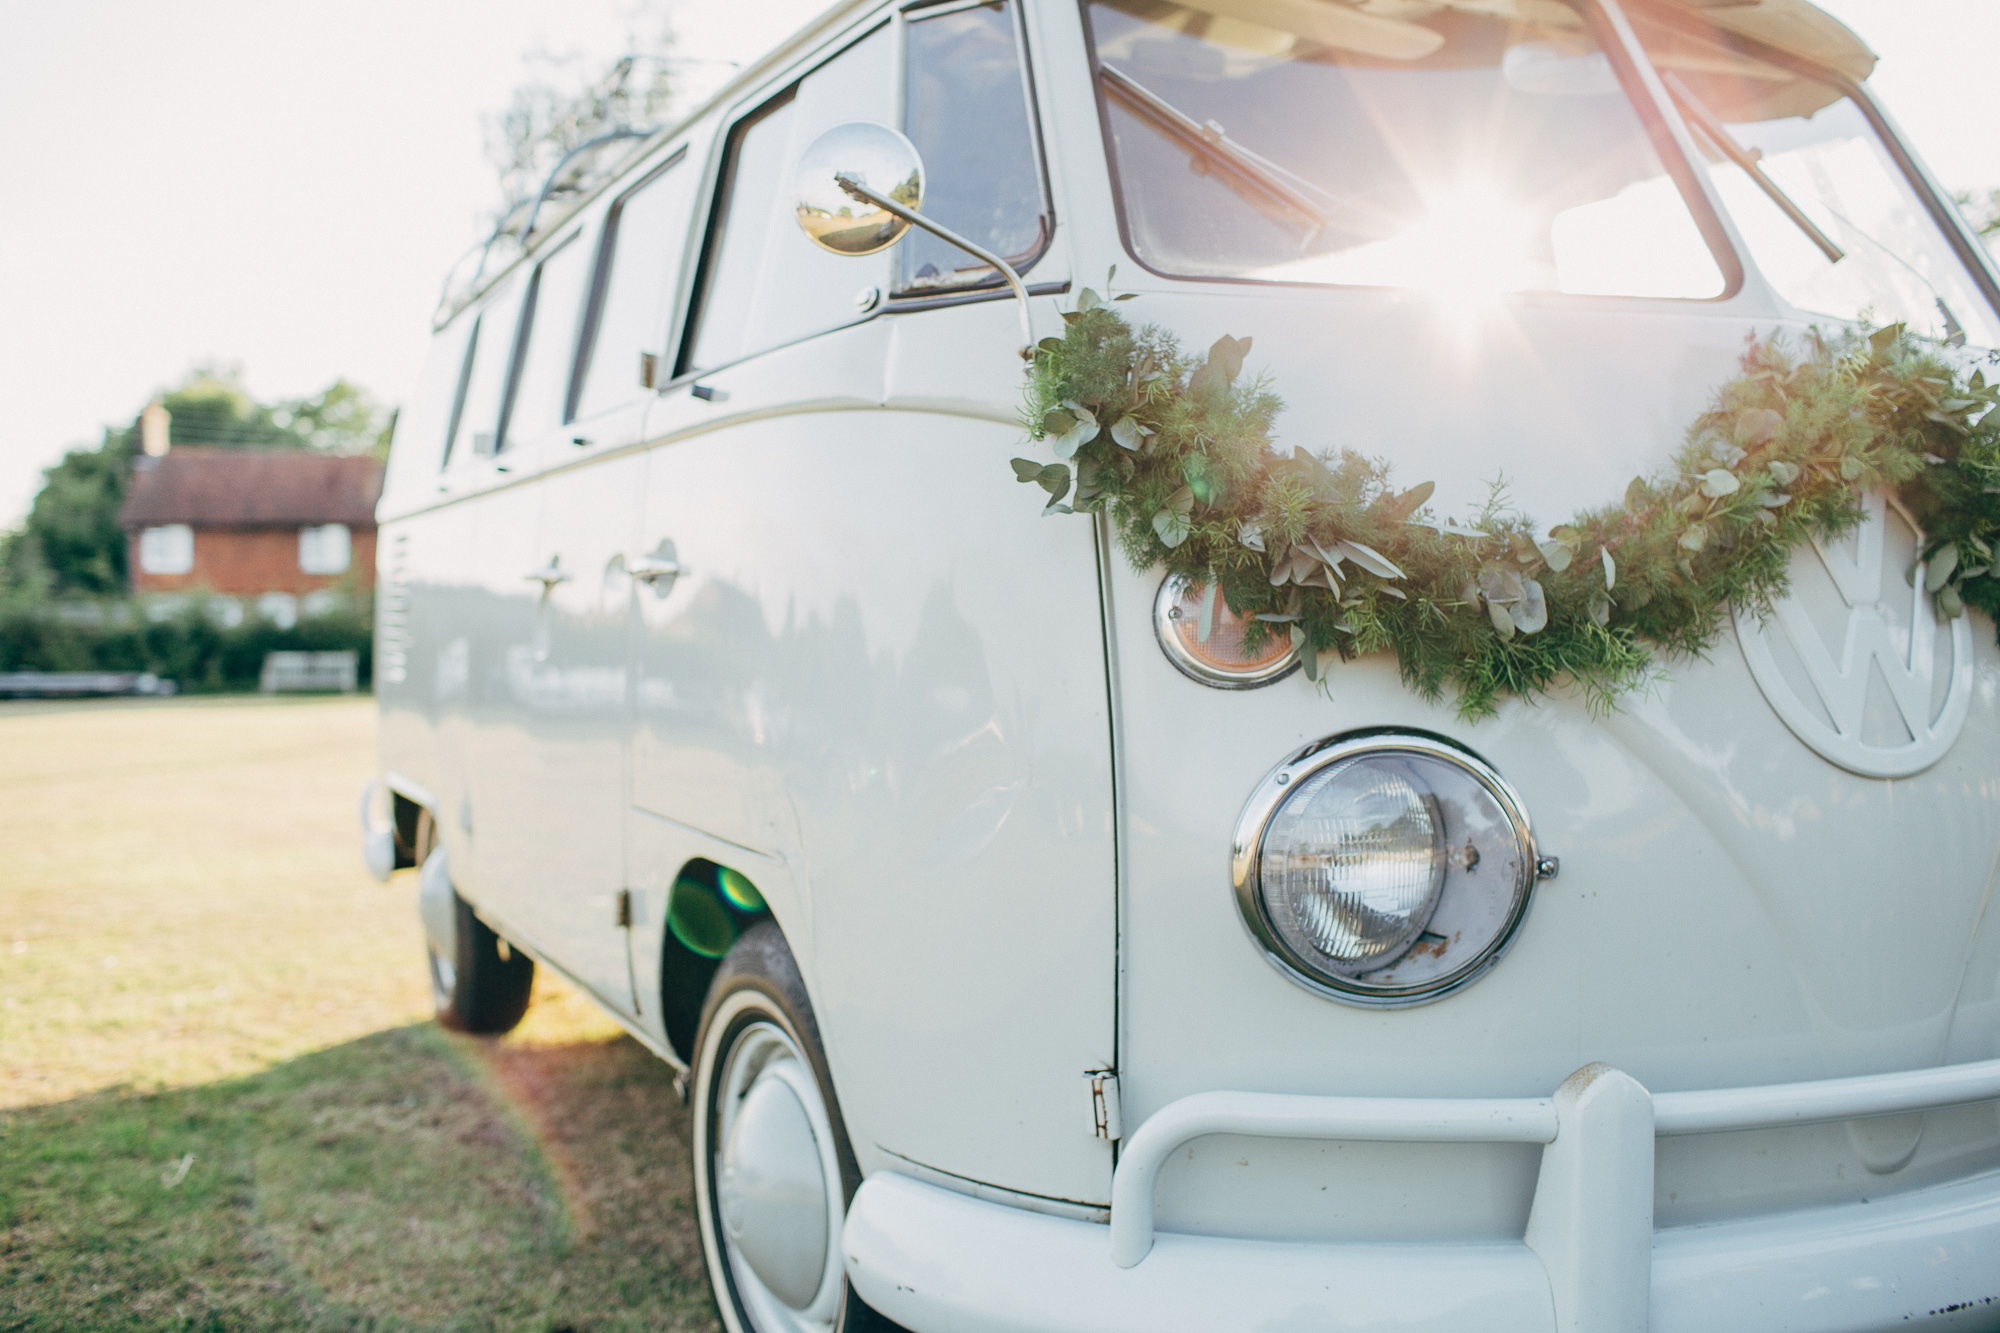 01 vw camper van for a wedding decorated with greenery